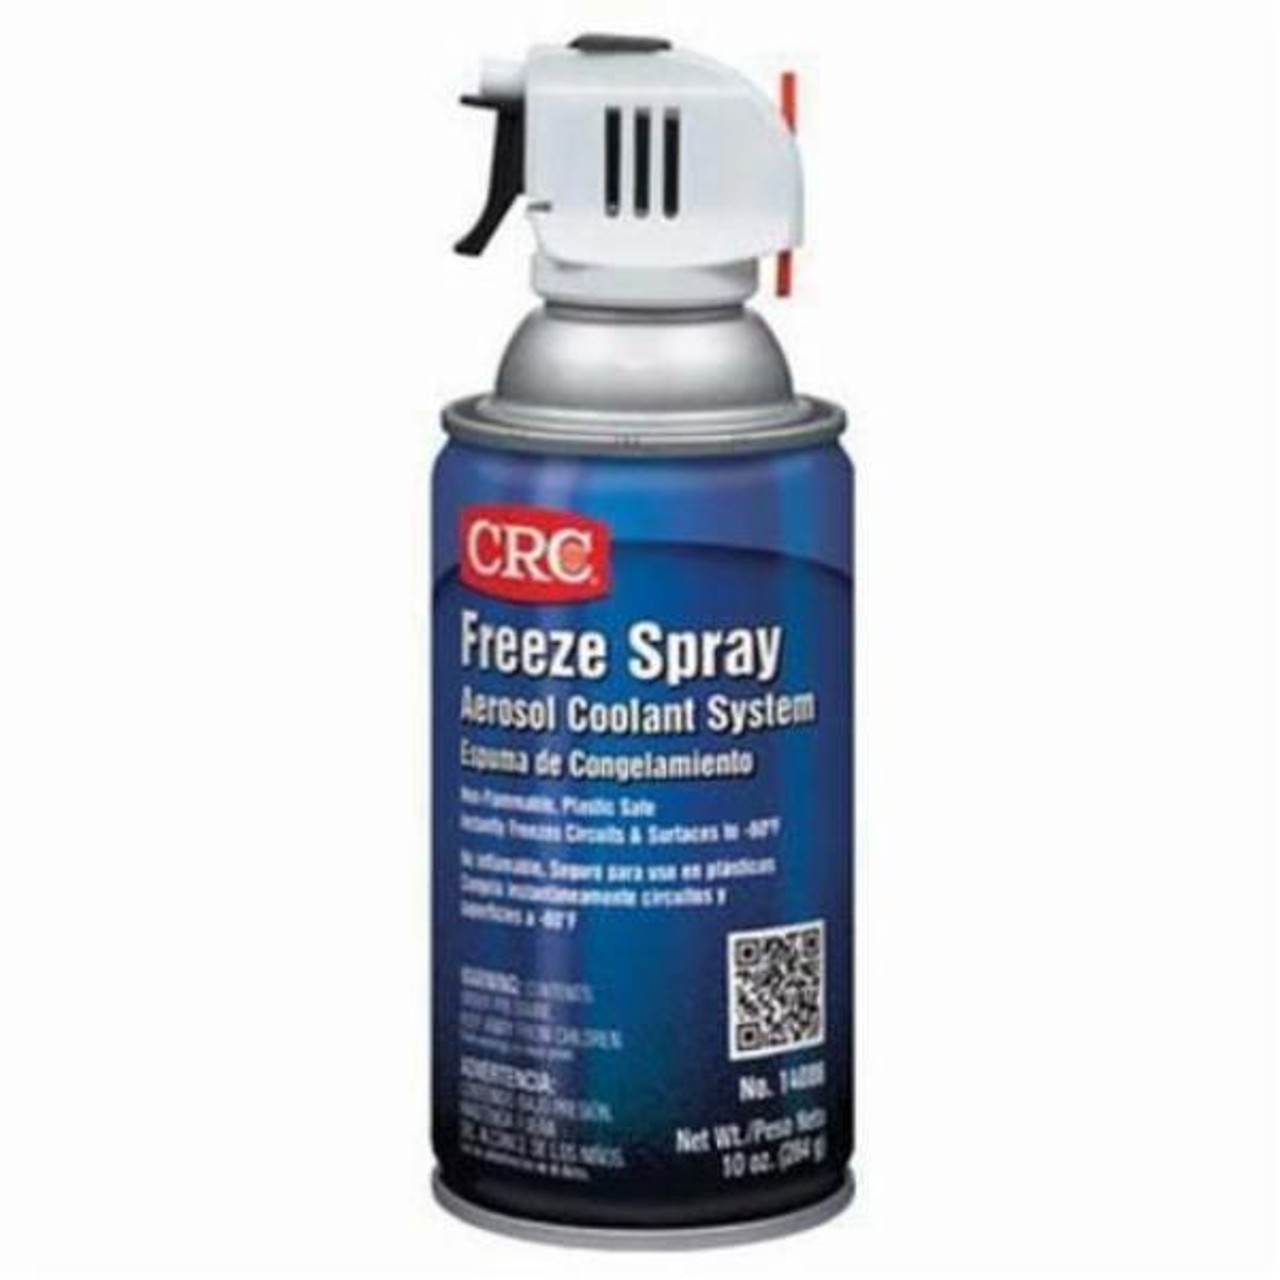 CRC 03300 General Purpose Non-Drying Film Non-Flammable Silicone Mold  Release, 16 oz Aerosol Can, Liquid Form, Clear/Oily Clear, 35 to 600 deg F